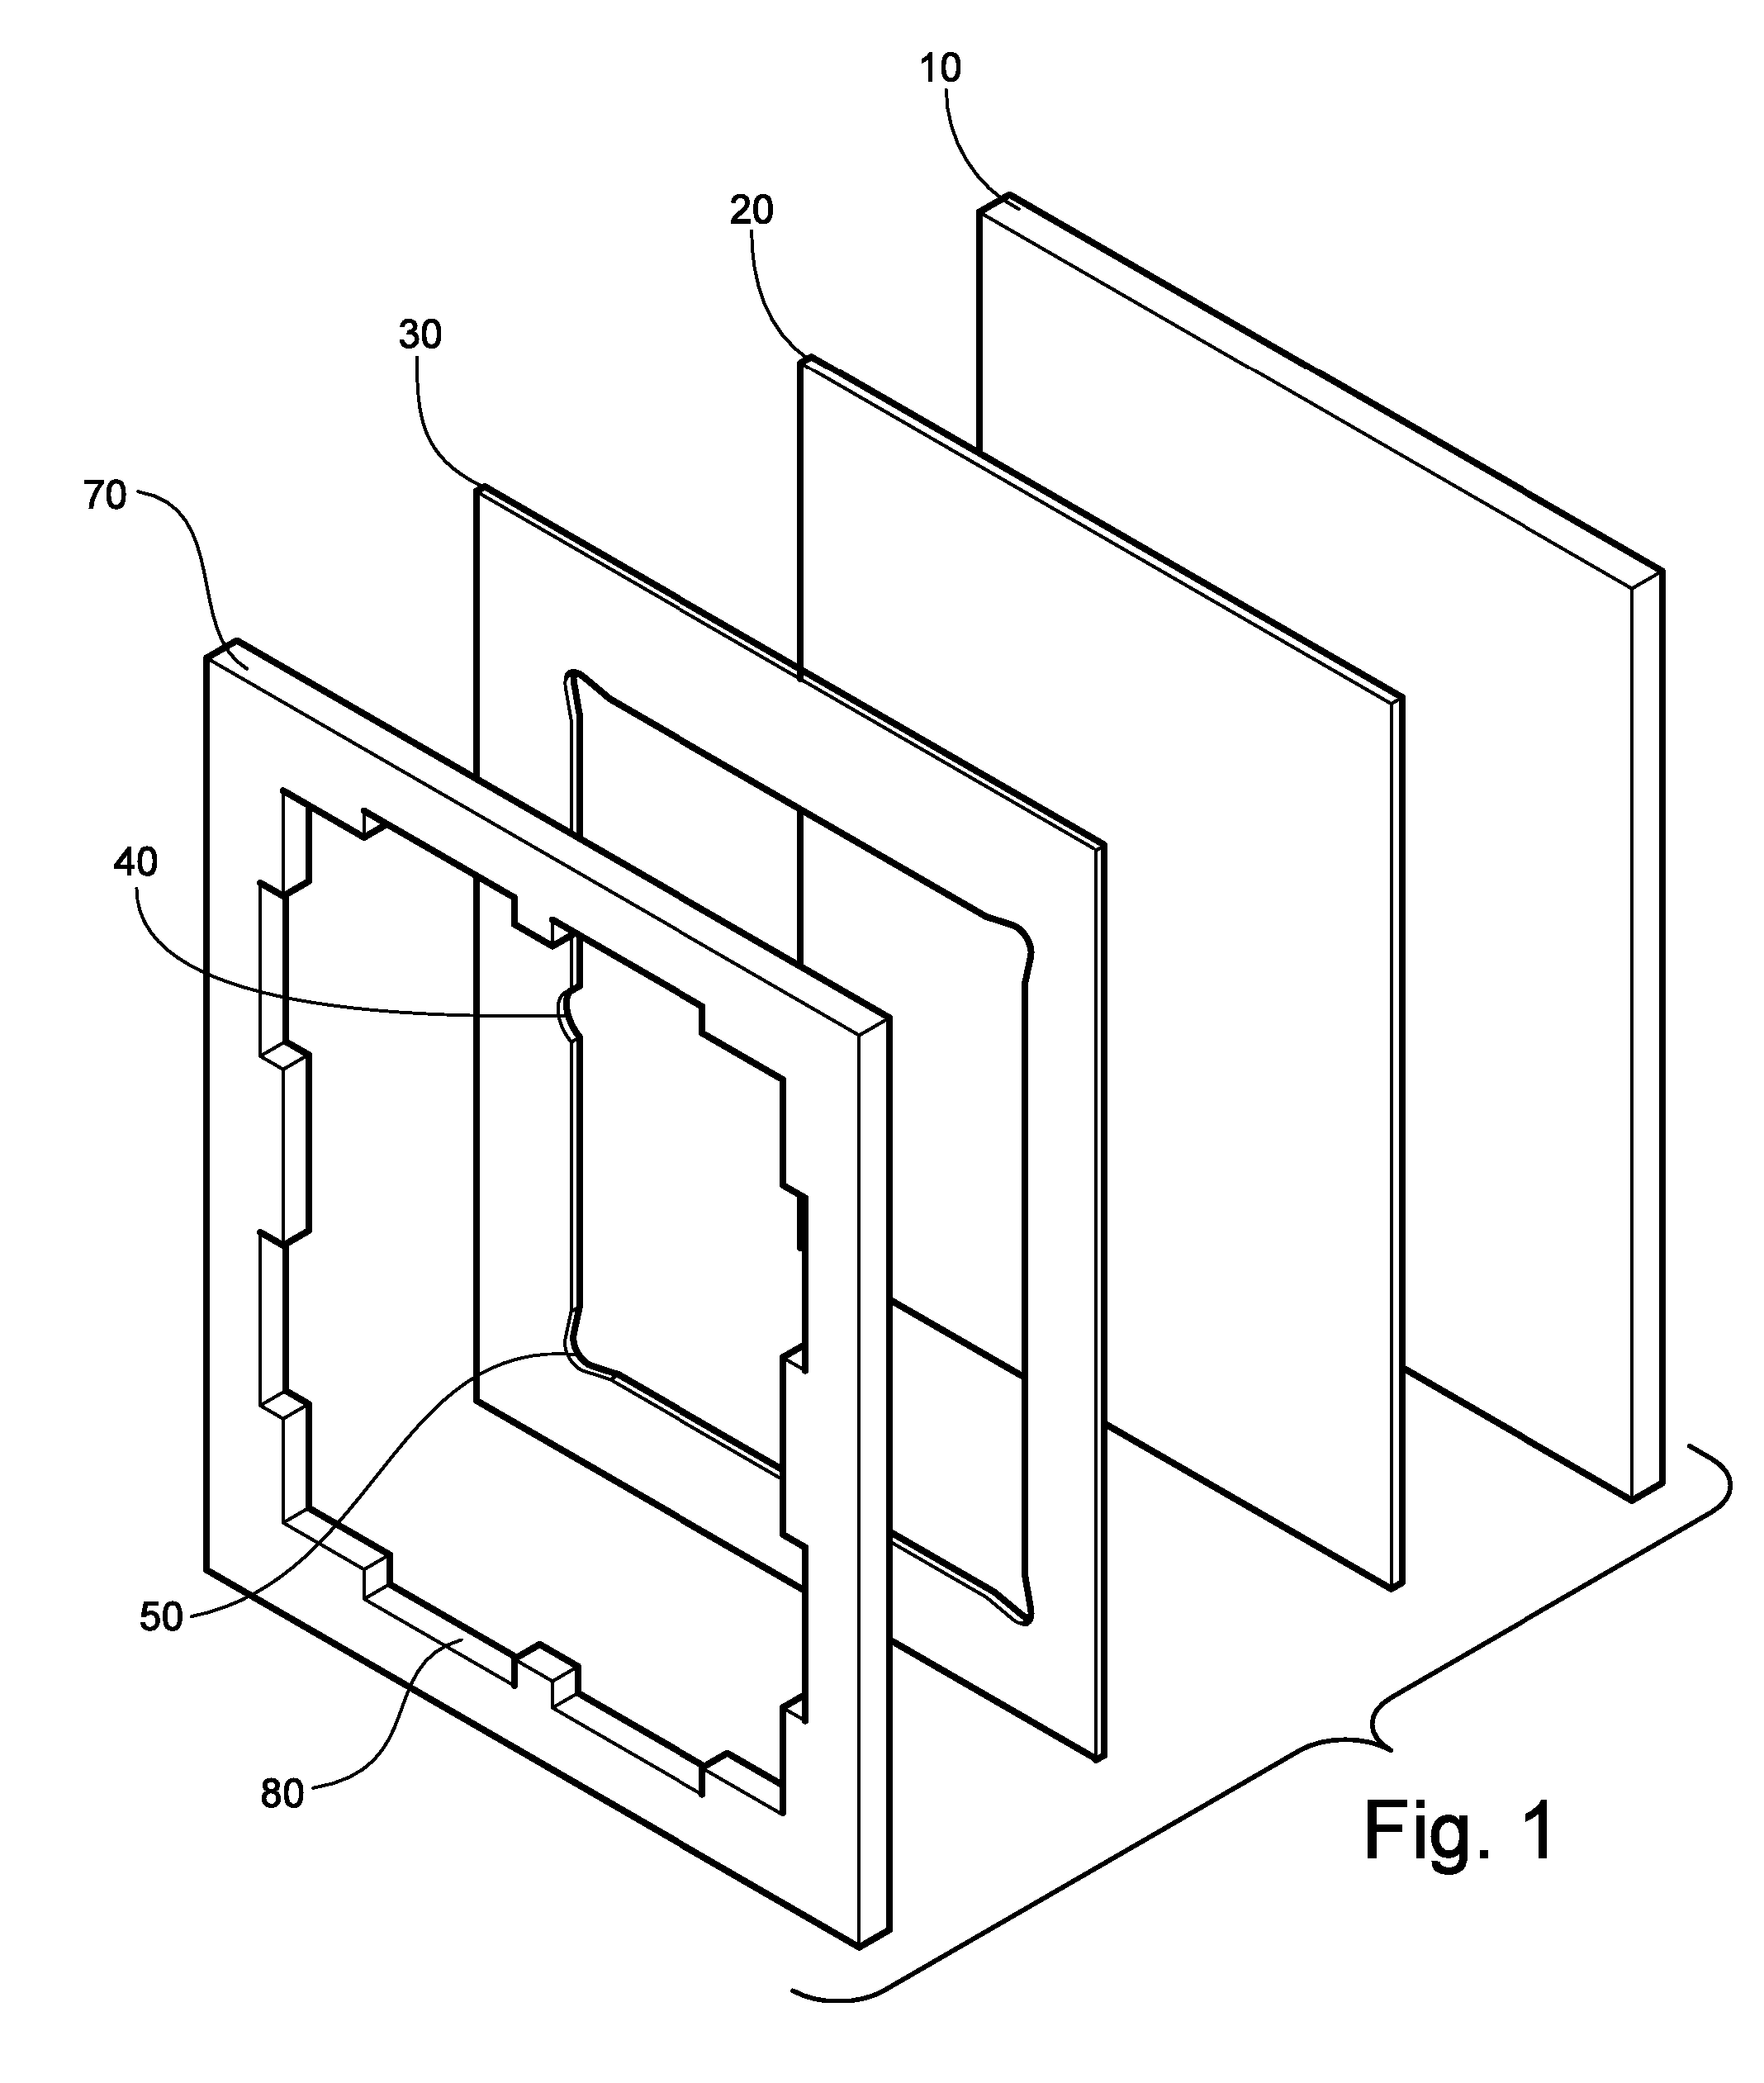 Device and Method for Cutting Mat and Liner for Double Matted Framed Artwork